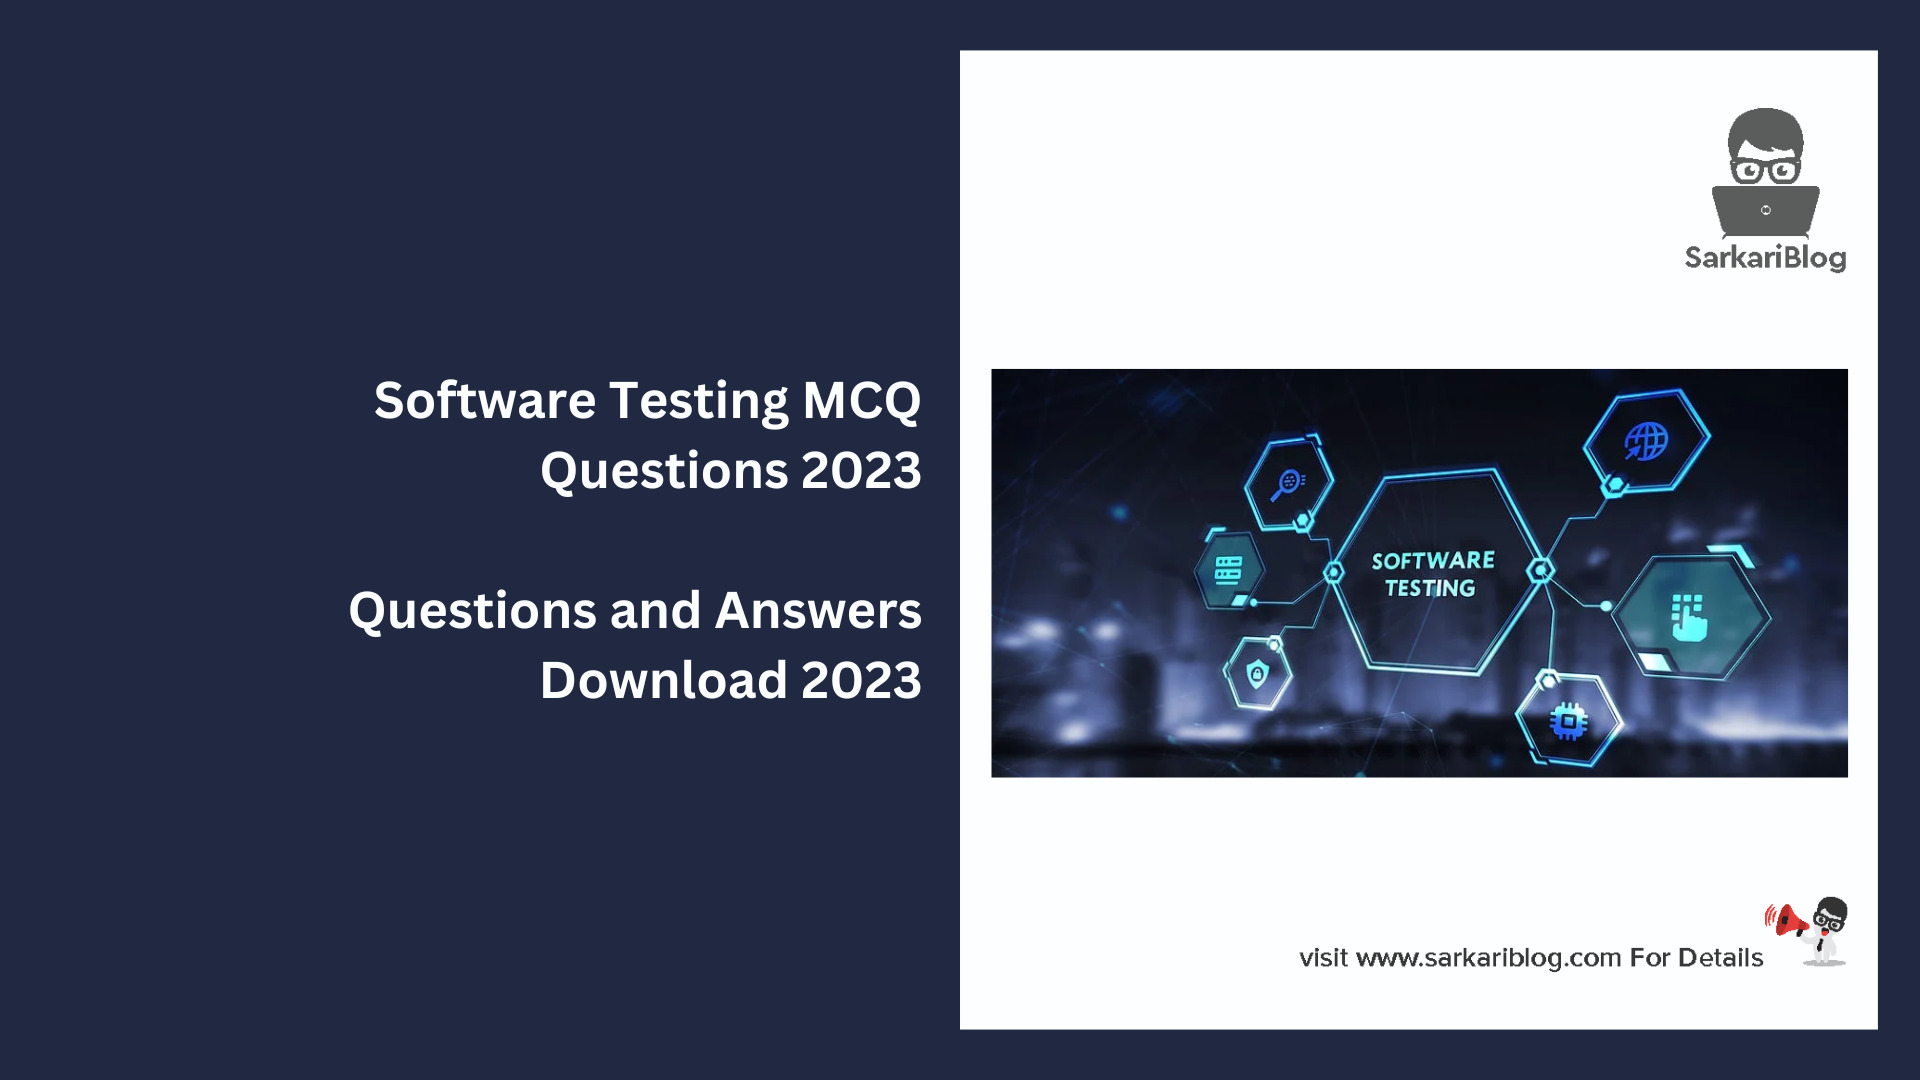 Software Testing MCQ Questions 2023